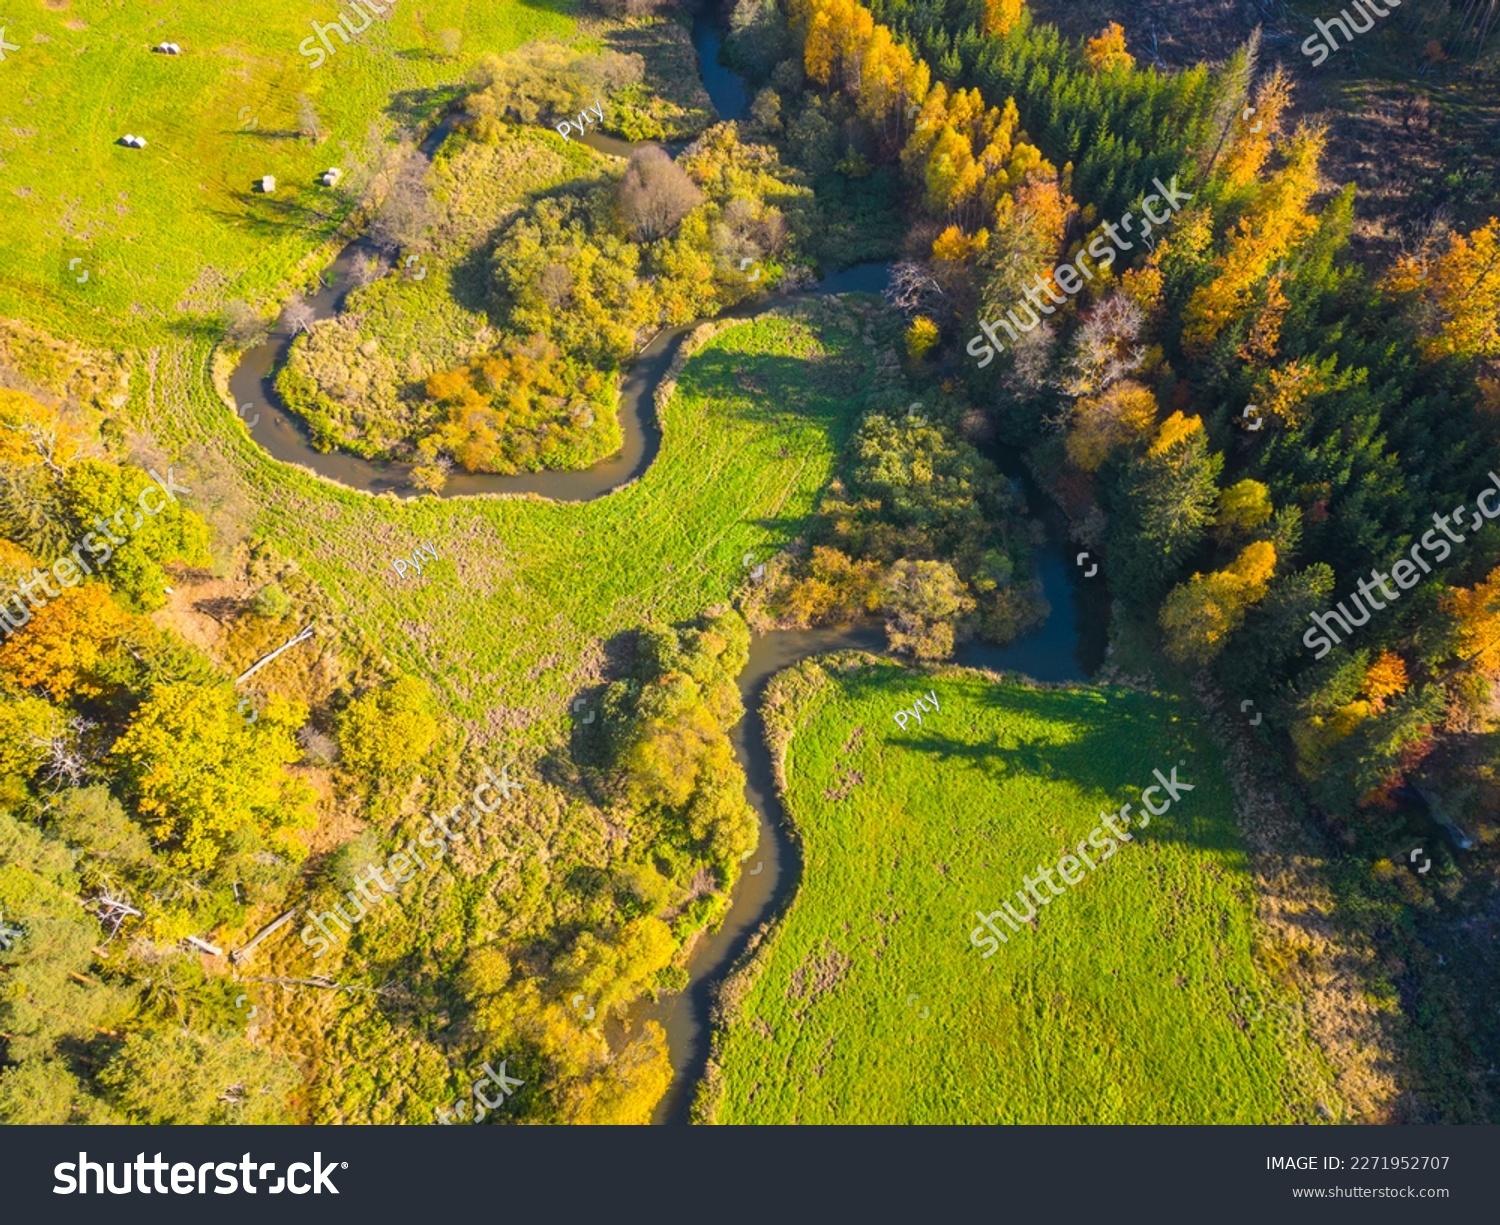 Narrow creek meanders in autumnal landscape. Green grass meadows and colourful trees. Aerial view from drone. #2271952707